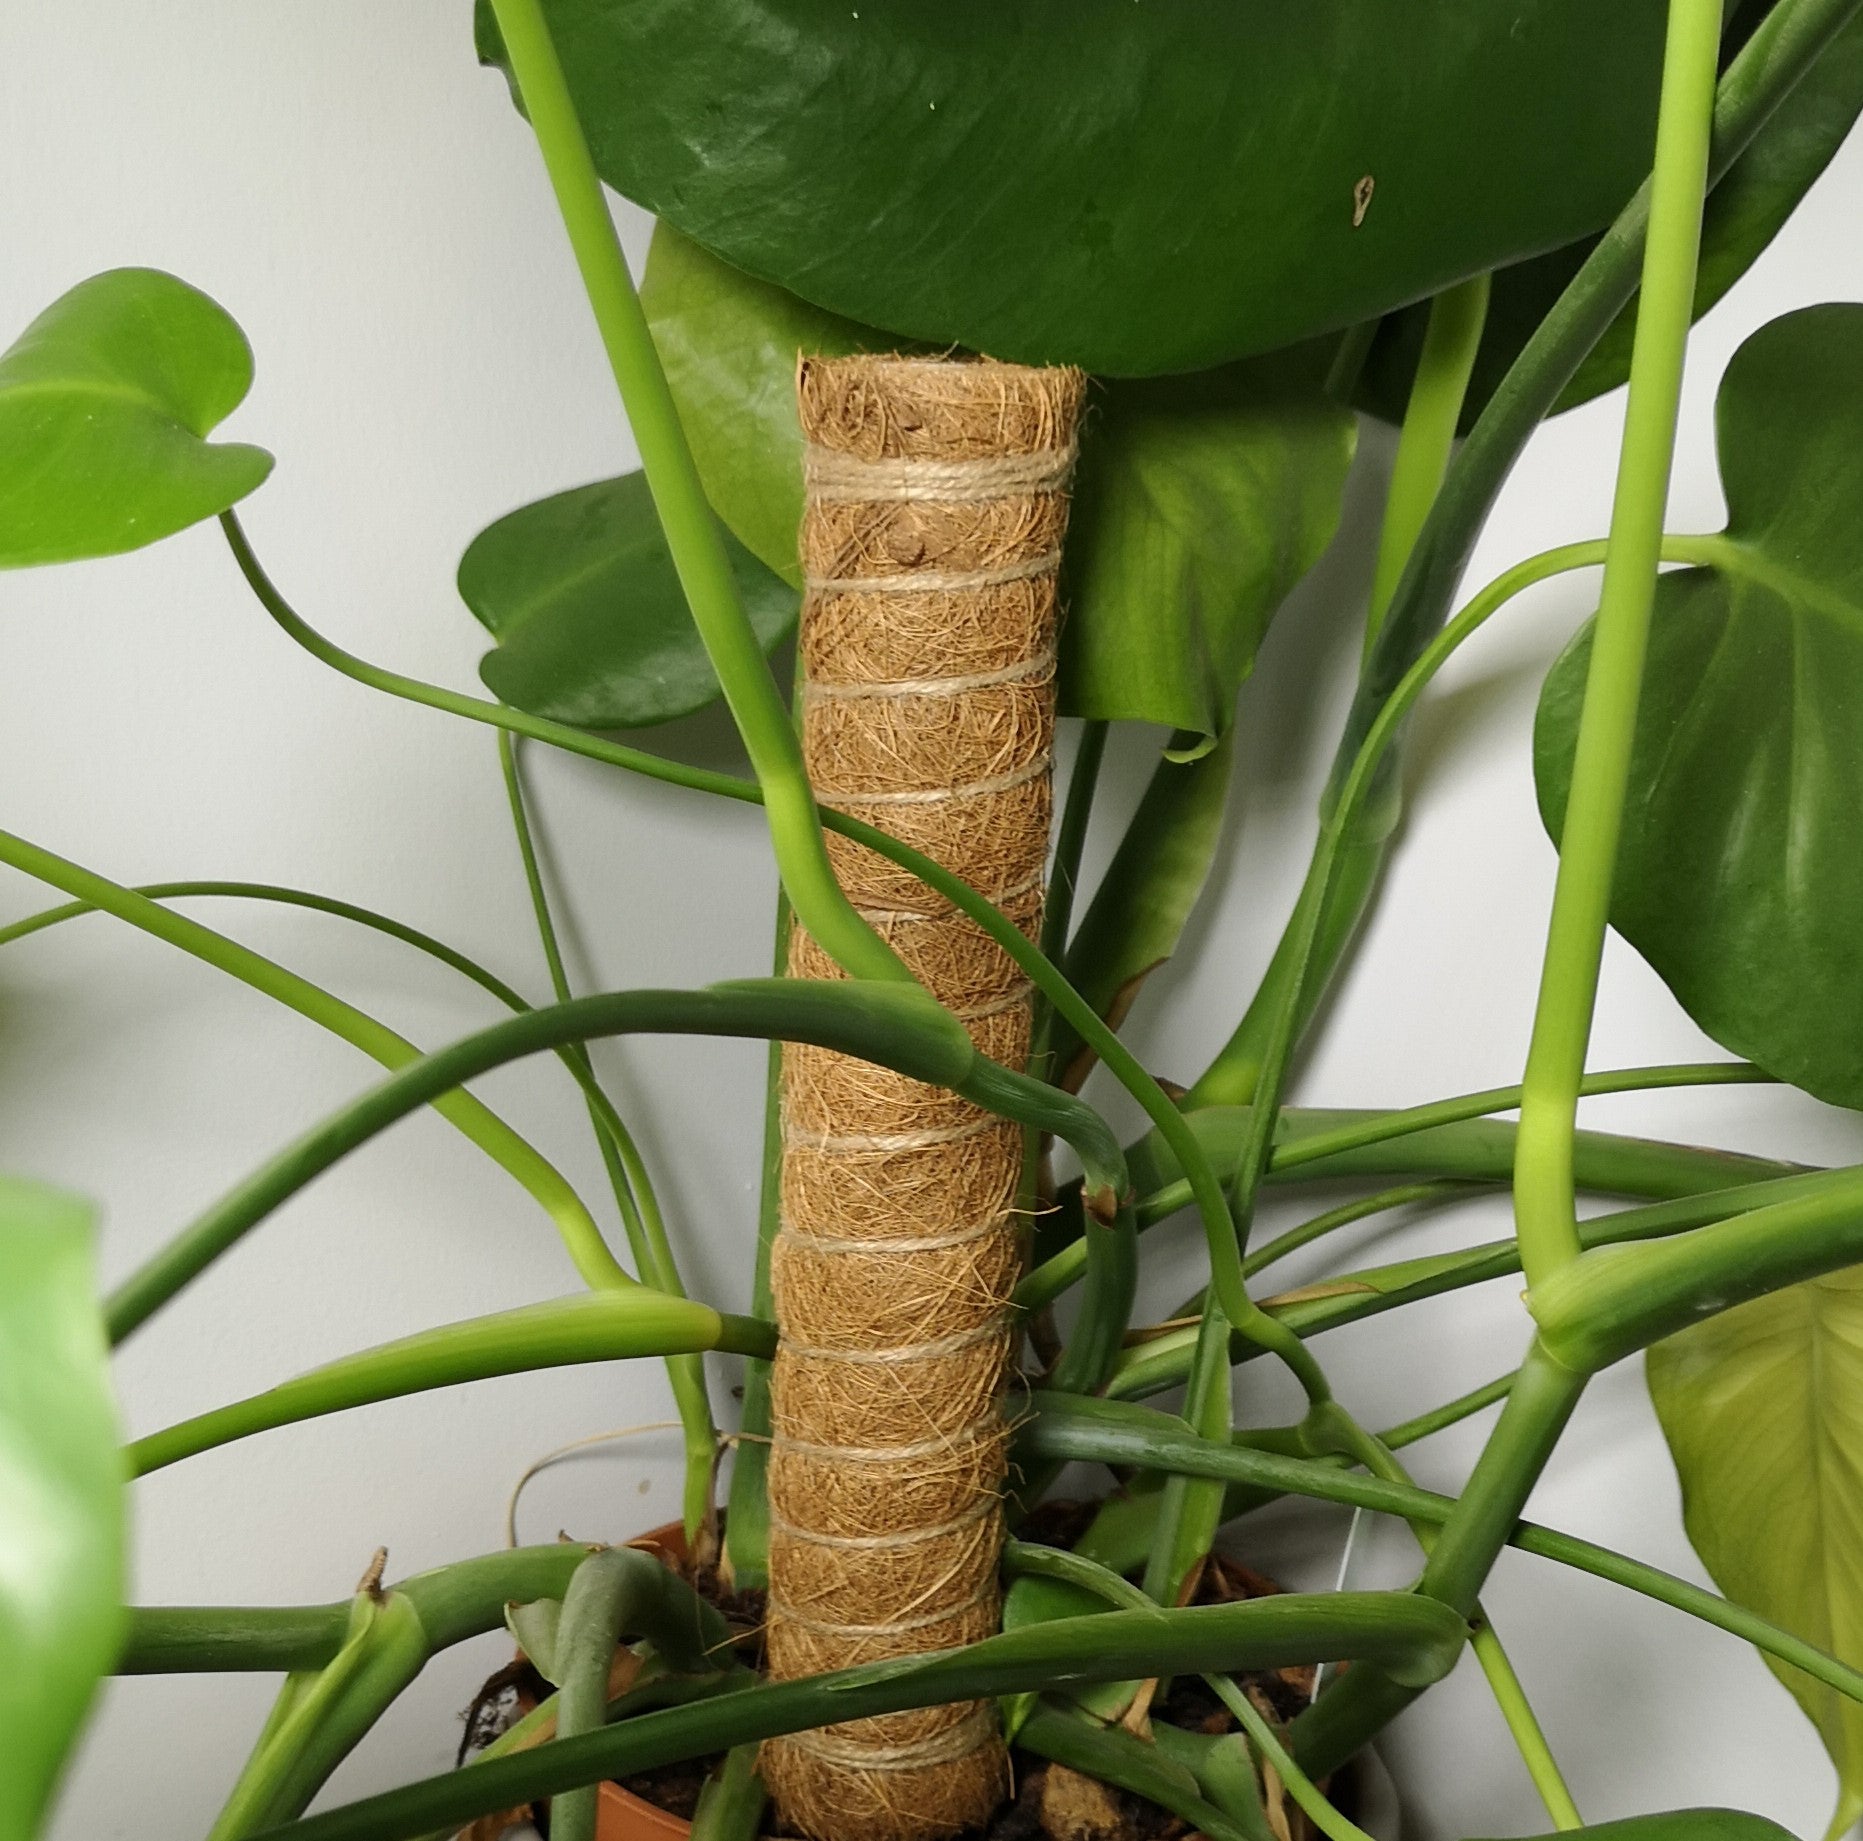 Samuel Alexander Garden Coco Fibre 2PCS 40cm Plant Support Pole Stick Totum with Green Ties and Strap 